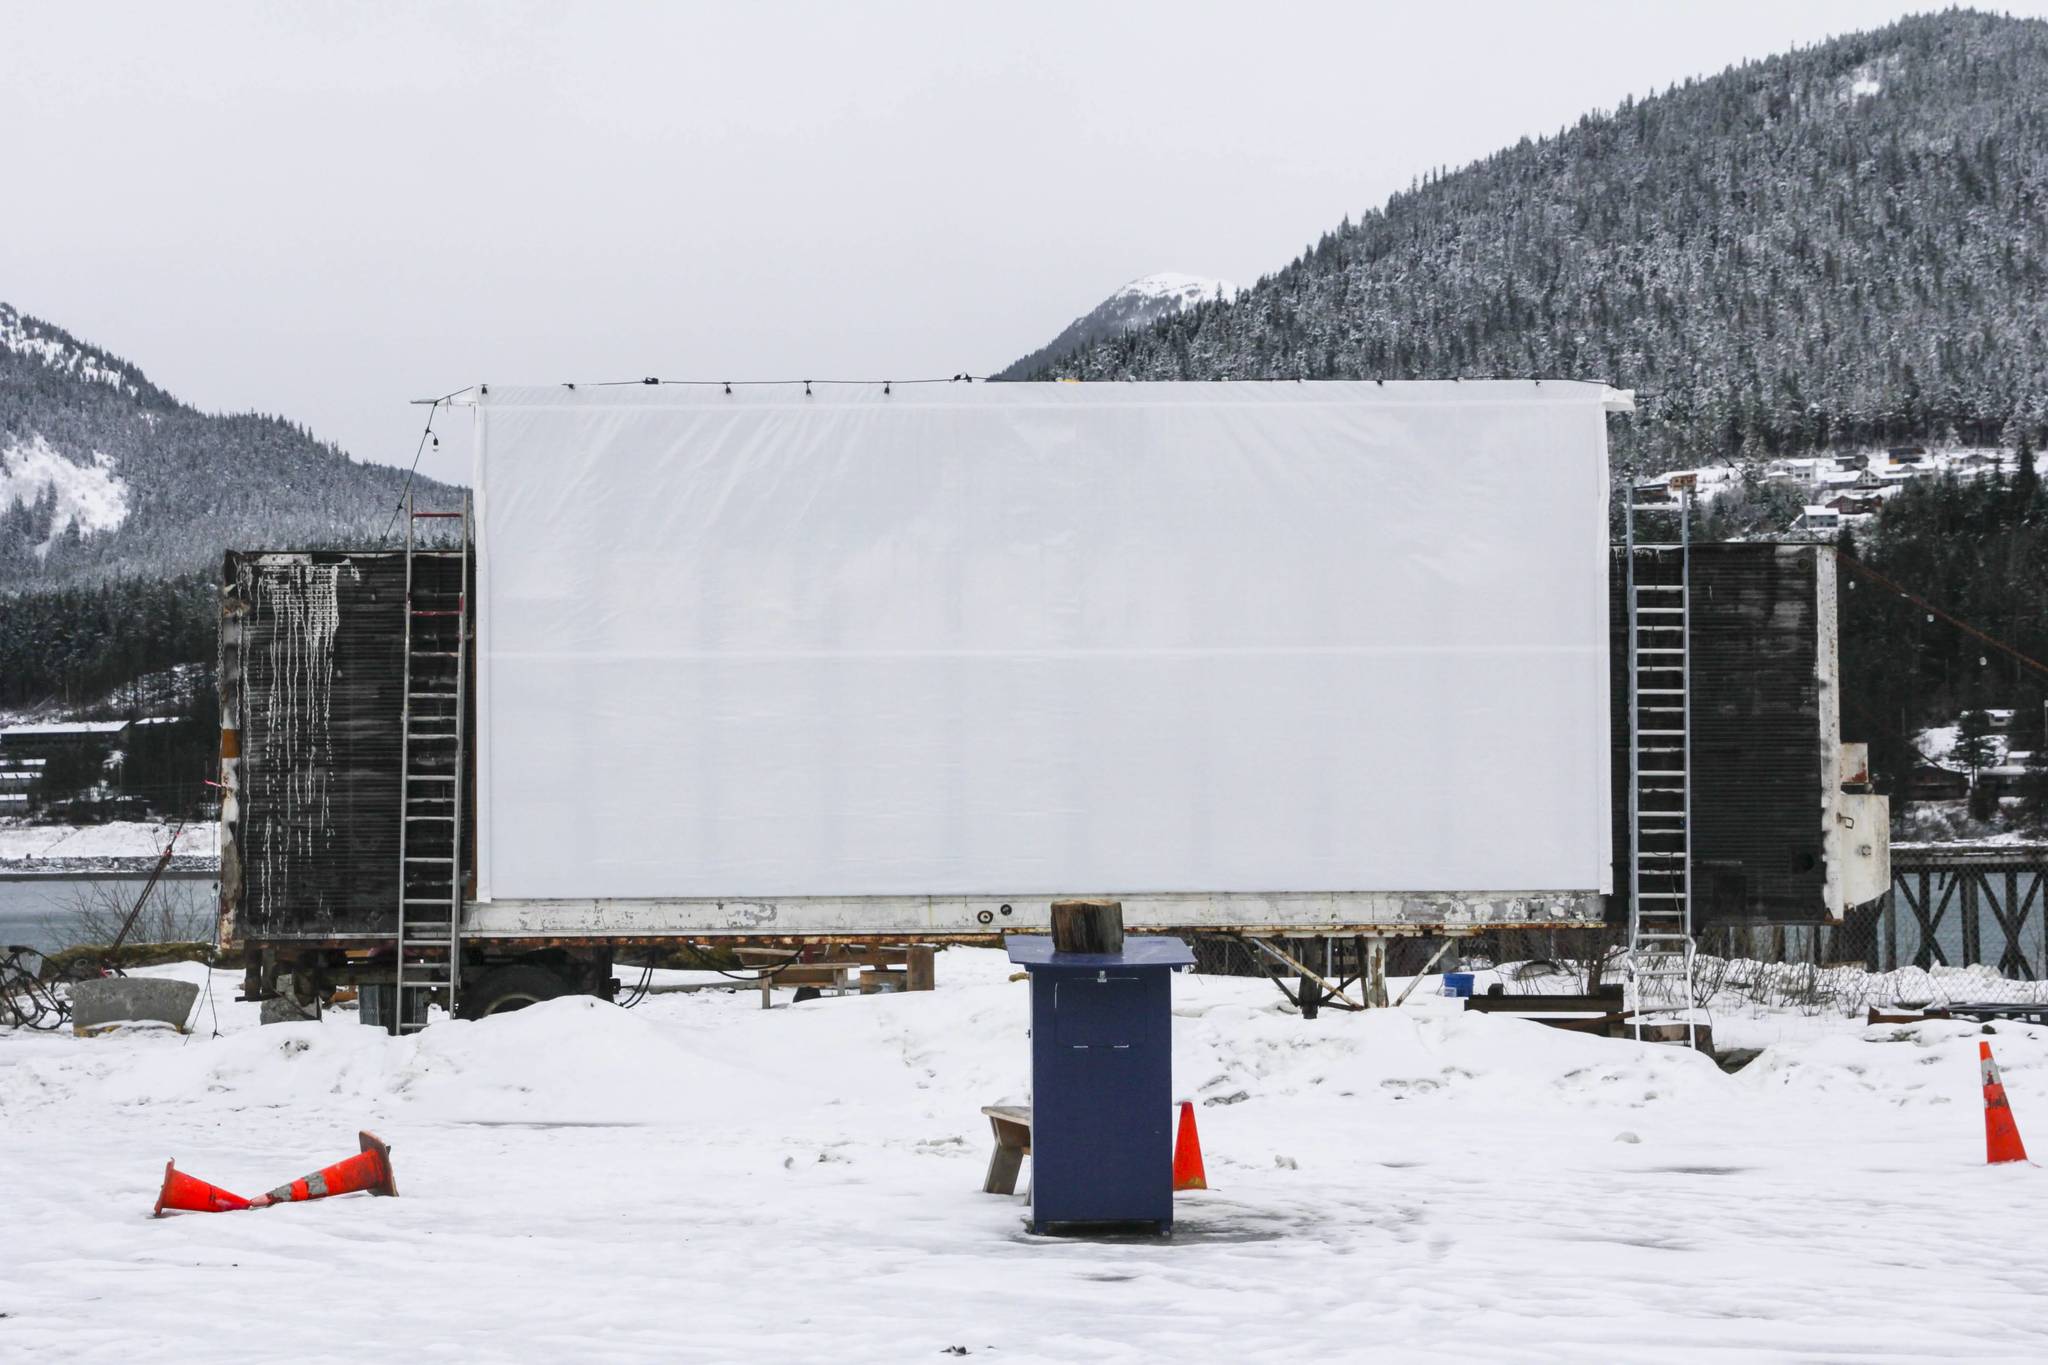 The Gold Town Nickelodeon’s drive-in theatre’s new location at the downtown subport lot hosts a fully armed and operational screen for all-weather conditions, seen here on Feb. 18, 2021. (Michael S. Lockett / Juneau Empire)